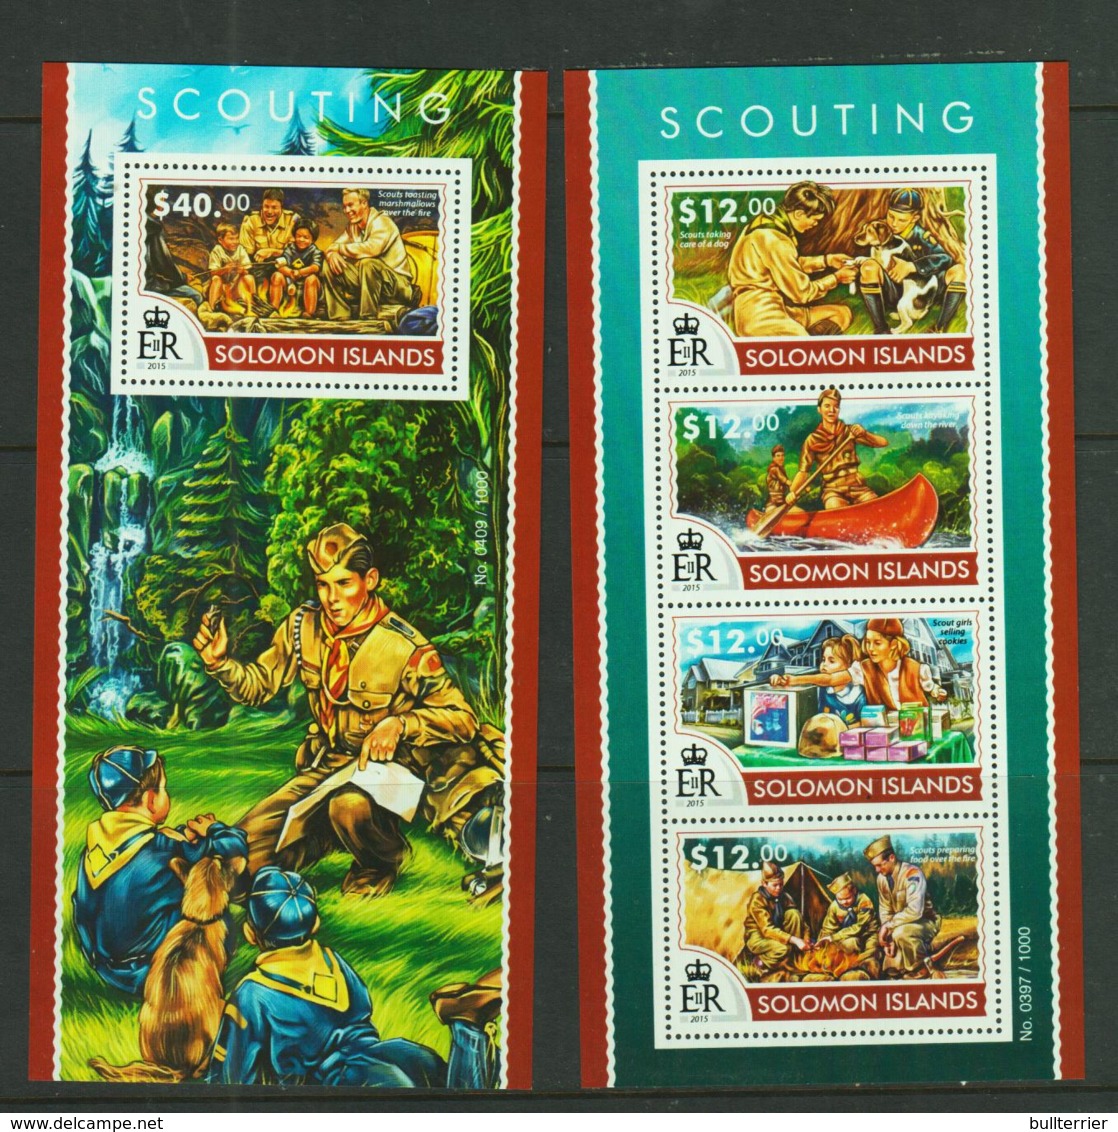 SCOUTS -  SOLOMON ISLANDS  -2015 - SCOUTING SHEETLET OF 4 + SOUVENIR SHEET MINT NEVER HINGED - Nuovi